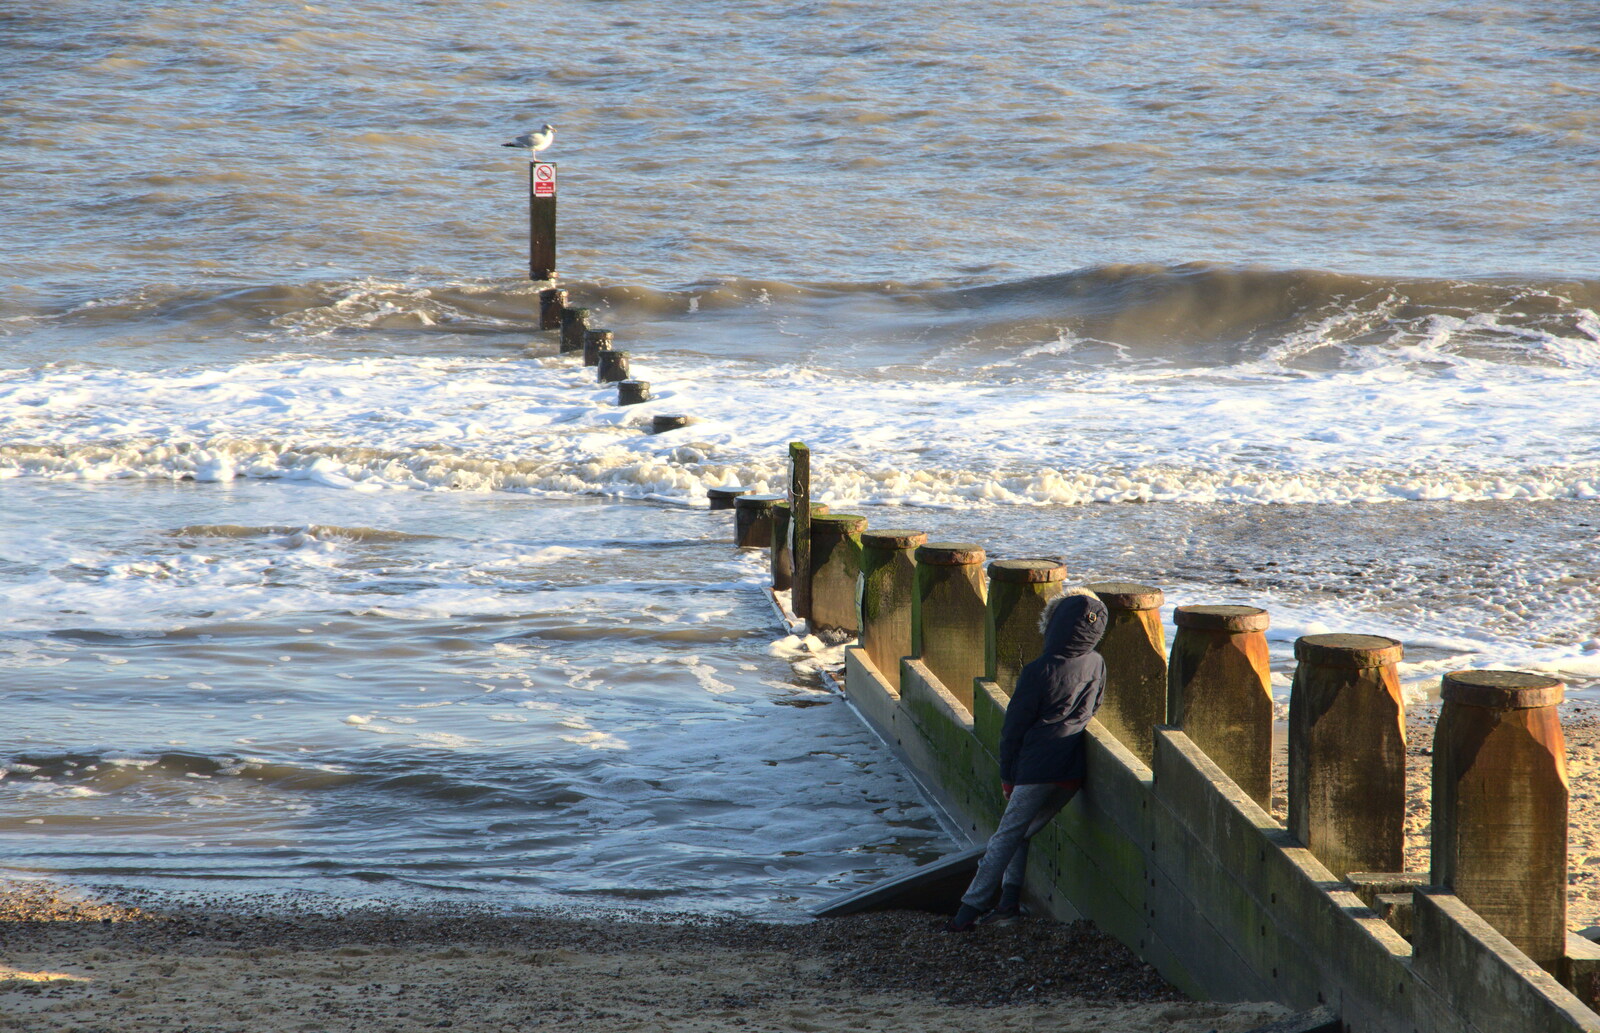 Harry leans on a groyne and stares out to sea from A Return to the Beach, Southwold, Suffolk - 20th December 2020